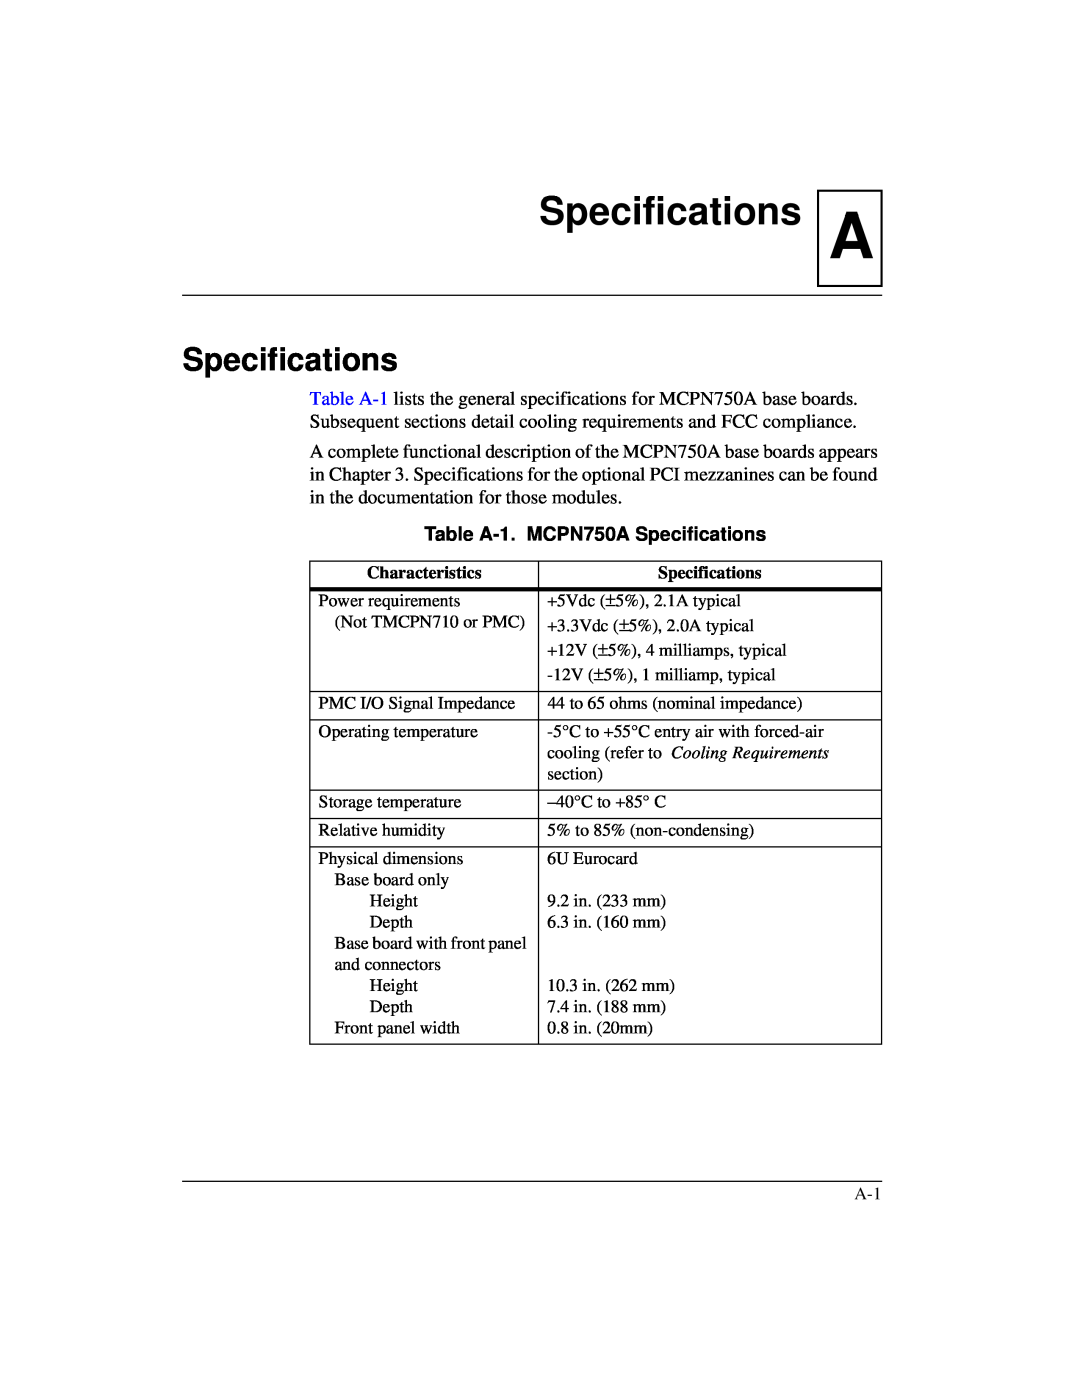 Motorola IH5 manual ASpecifications, Table A-1. MCPN750A Specifications 